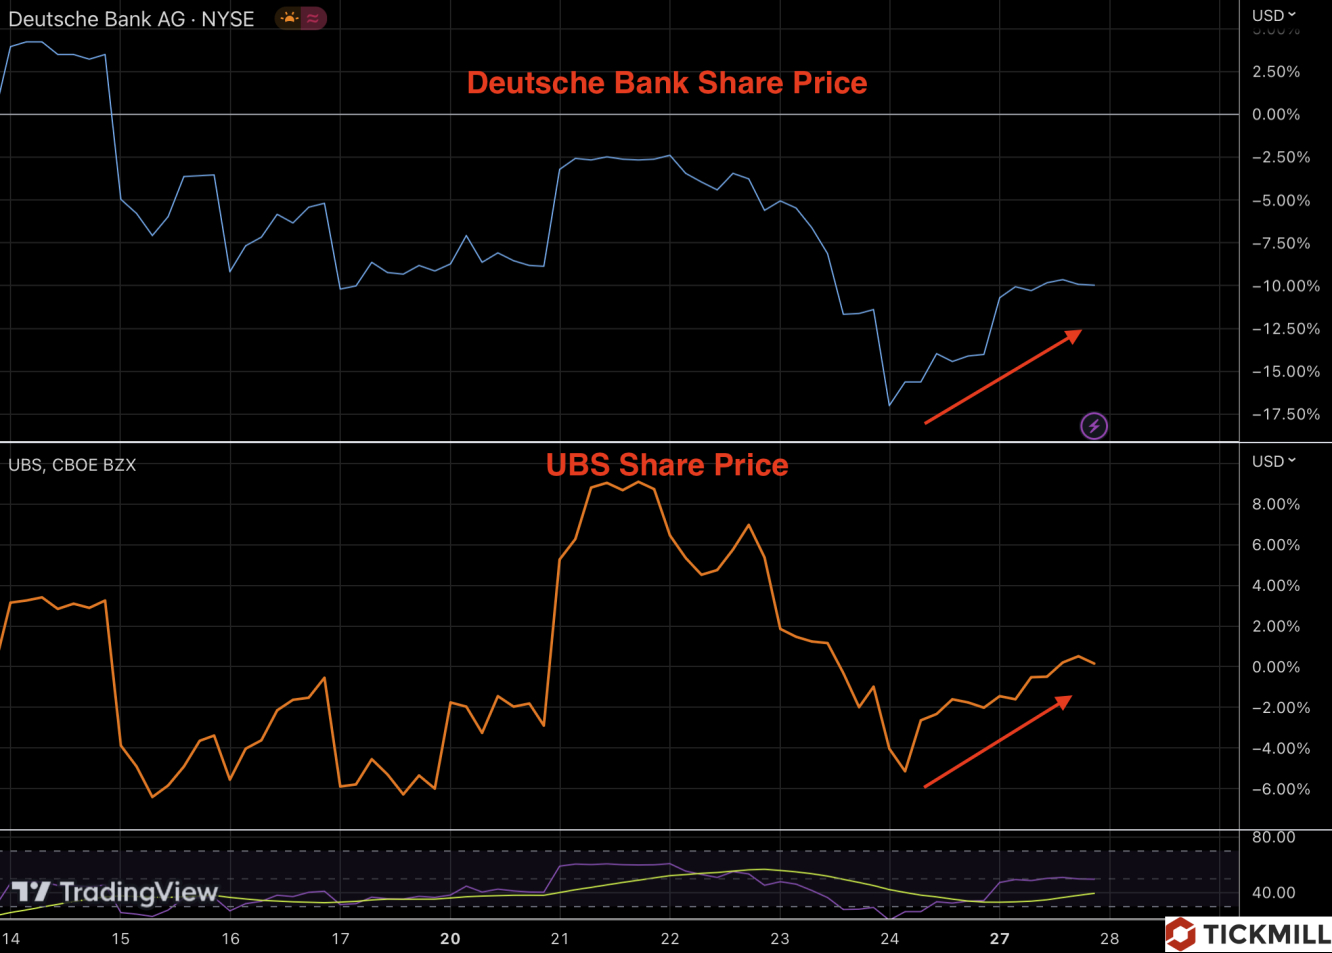 DB and UBS share prices